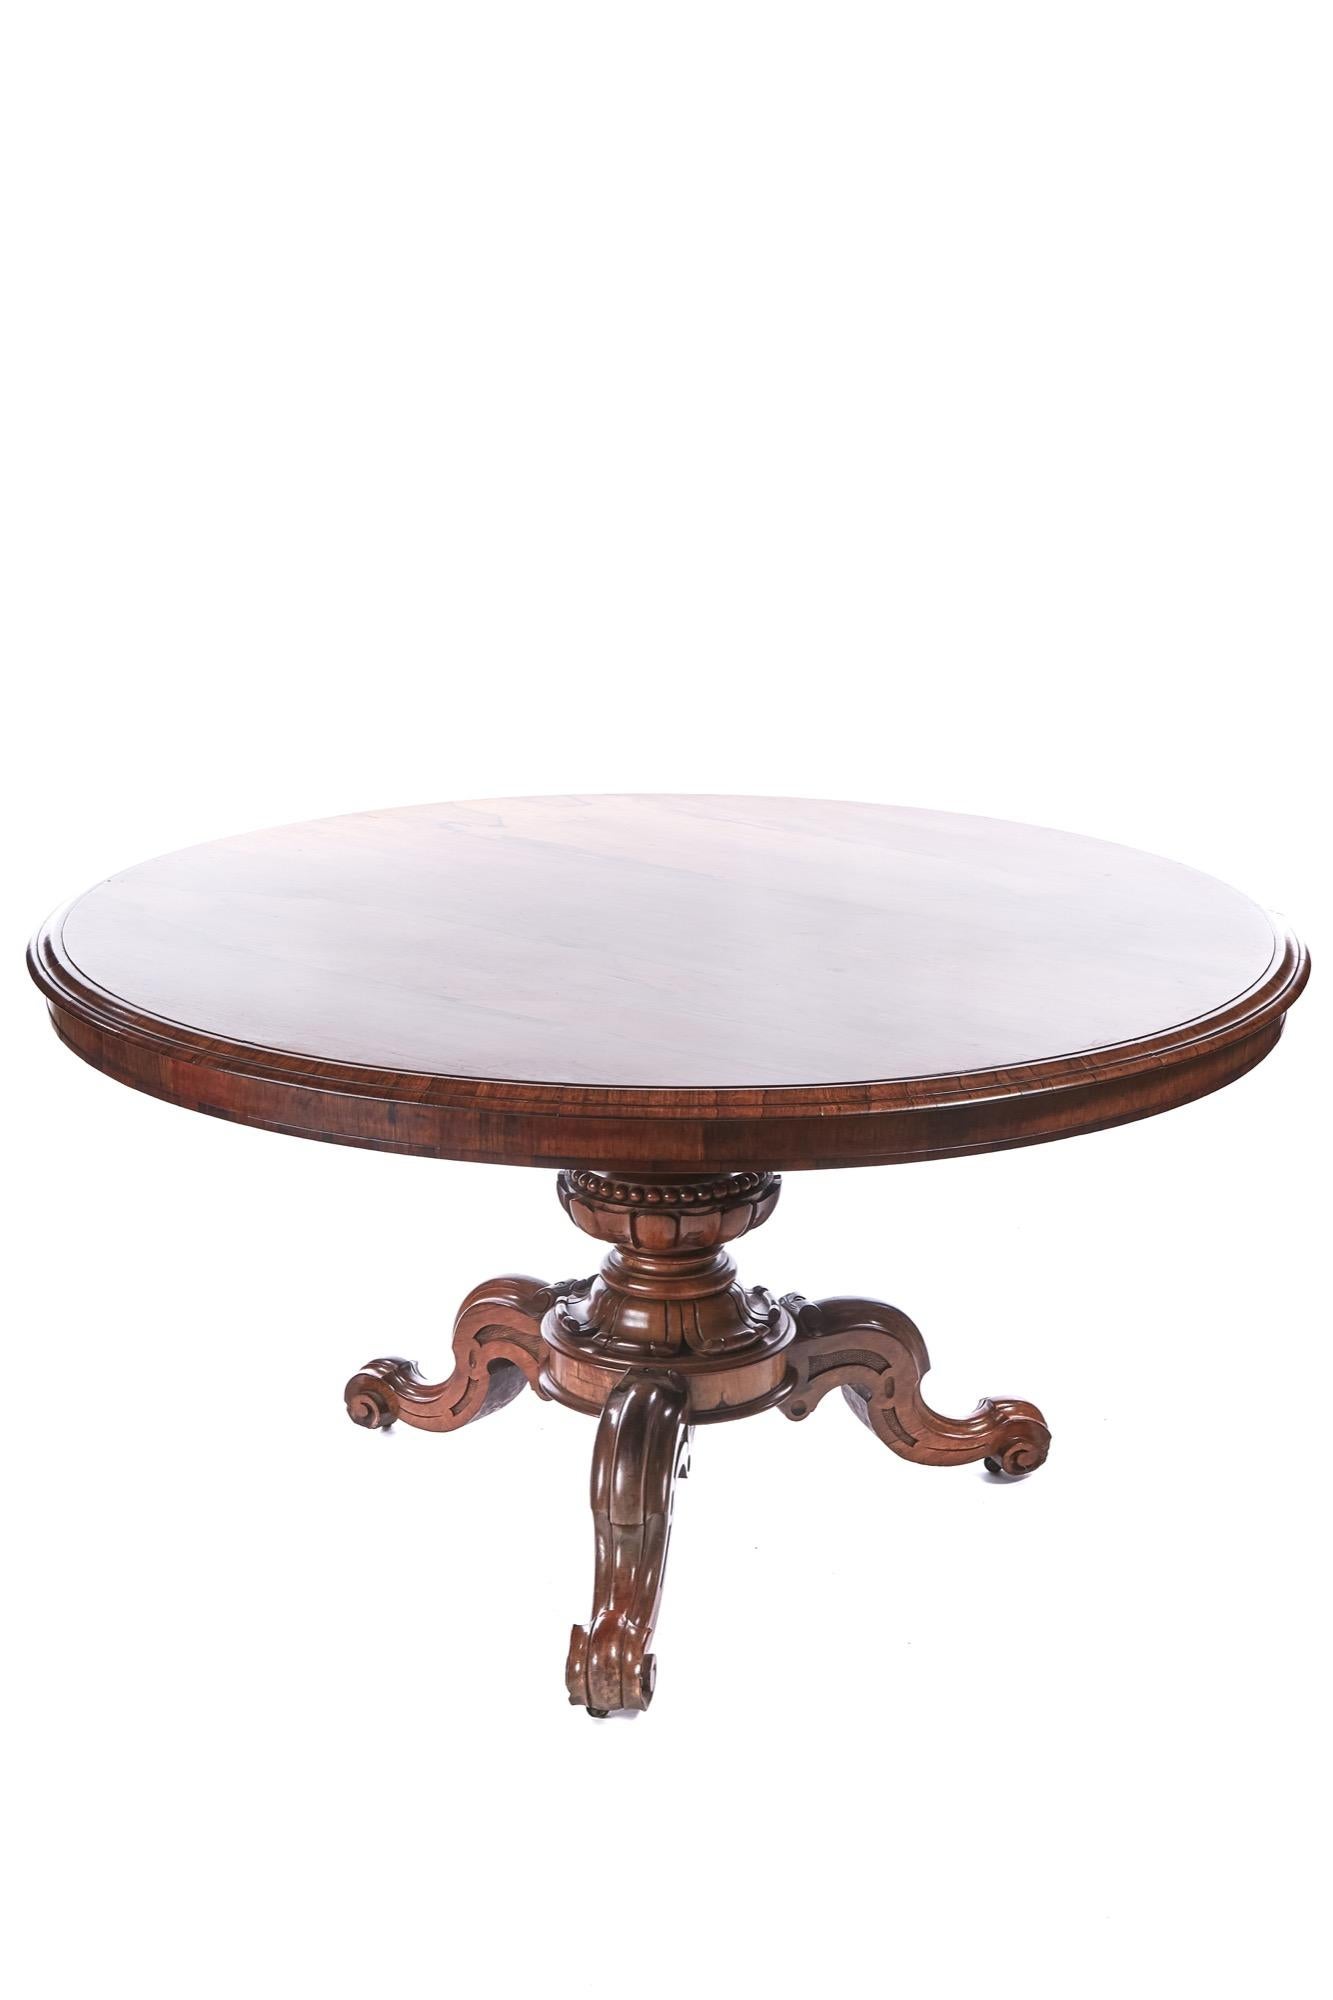 Outstanding rosewood William IV round centre table having an outstanding rosewood top with a shaped edge, raised on a lovely shaped carved reeded column standing on 3 shaped carved solid rosewood cabriole legs with original casters.
Fantastic color